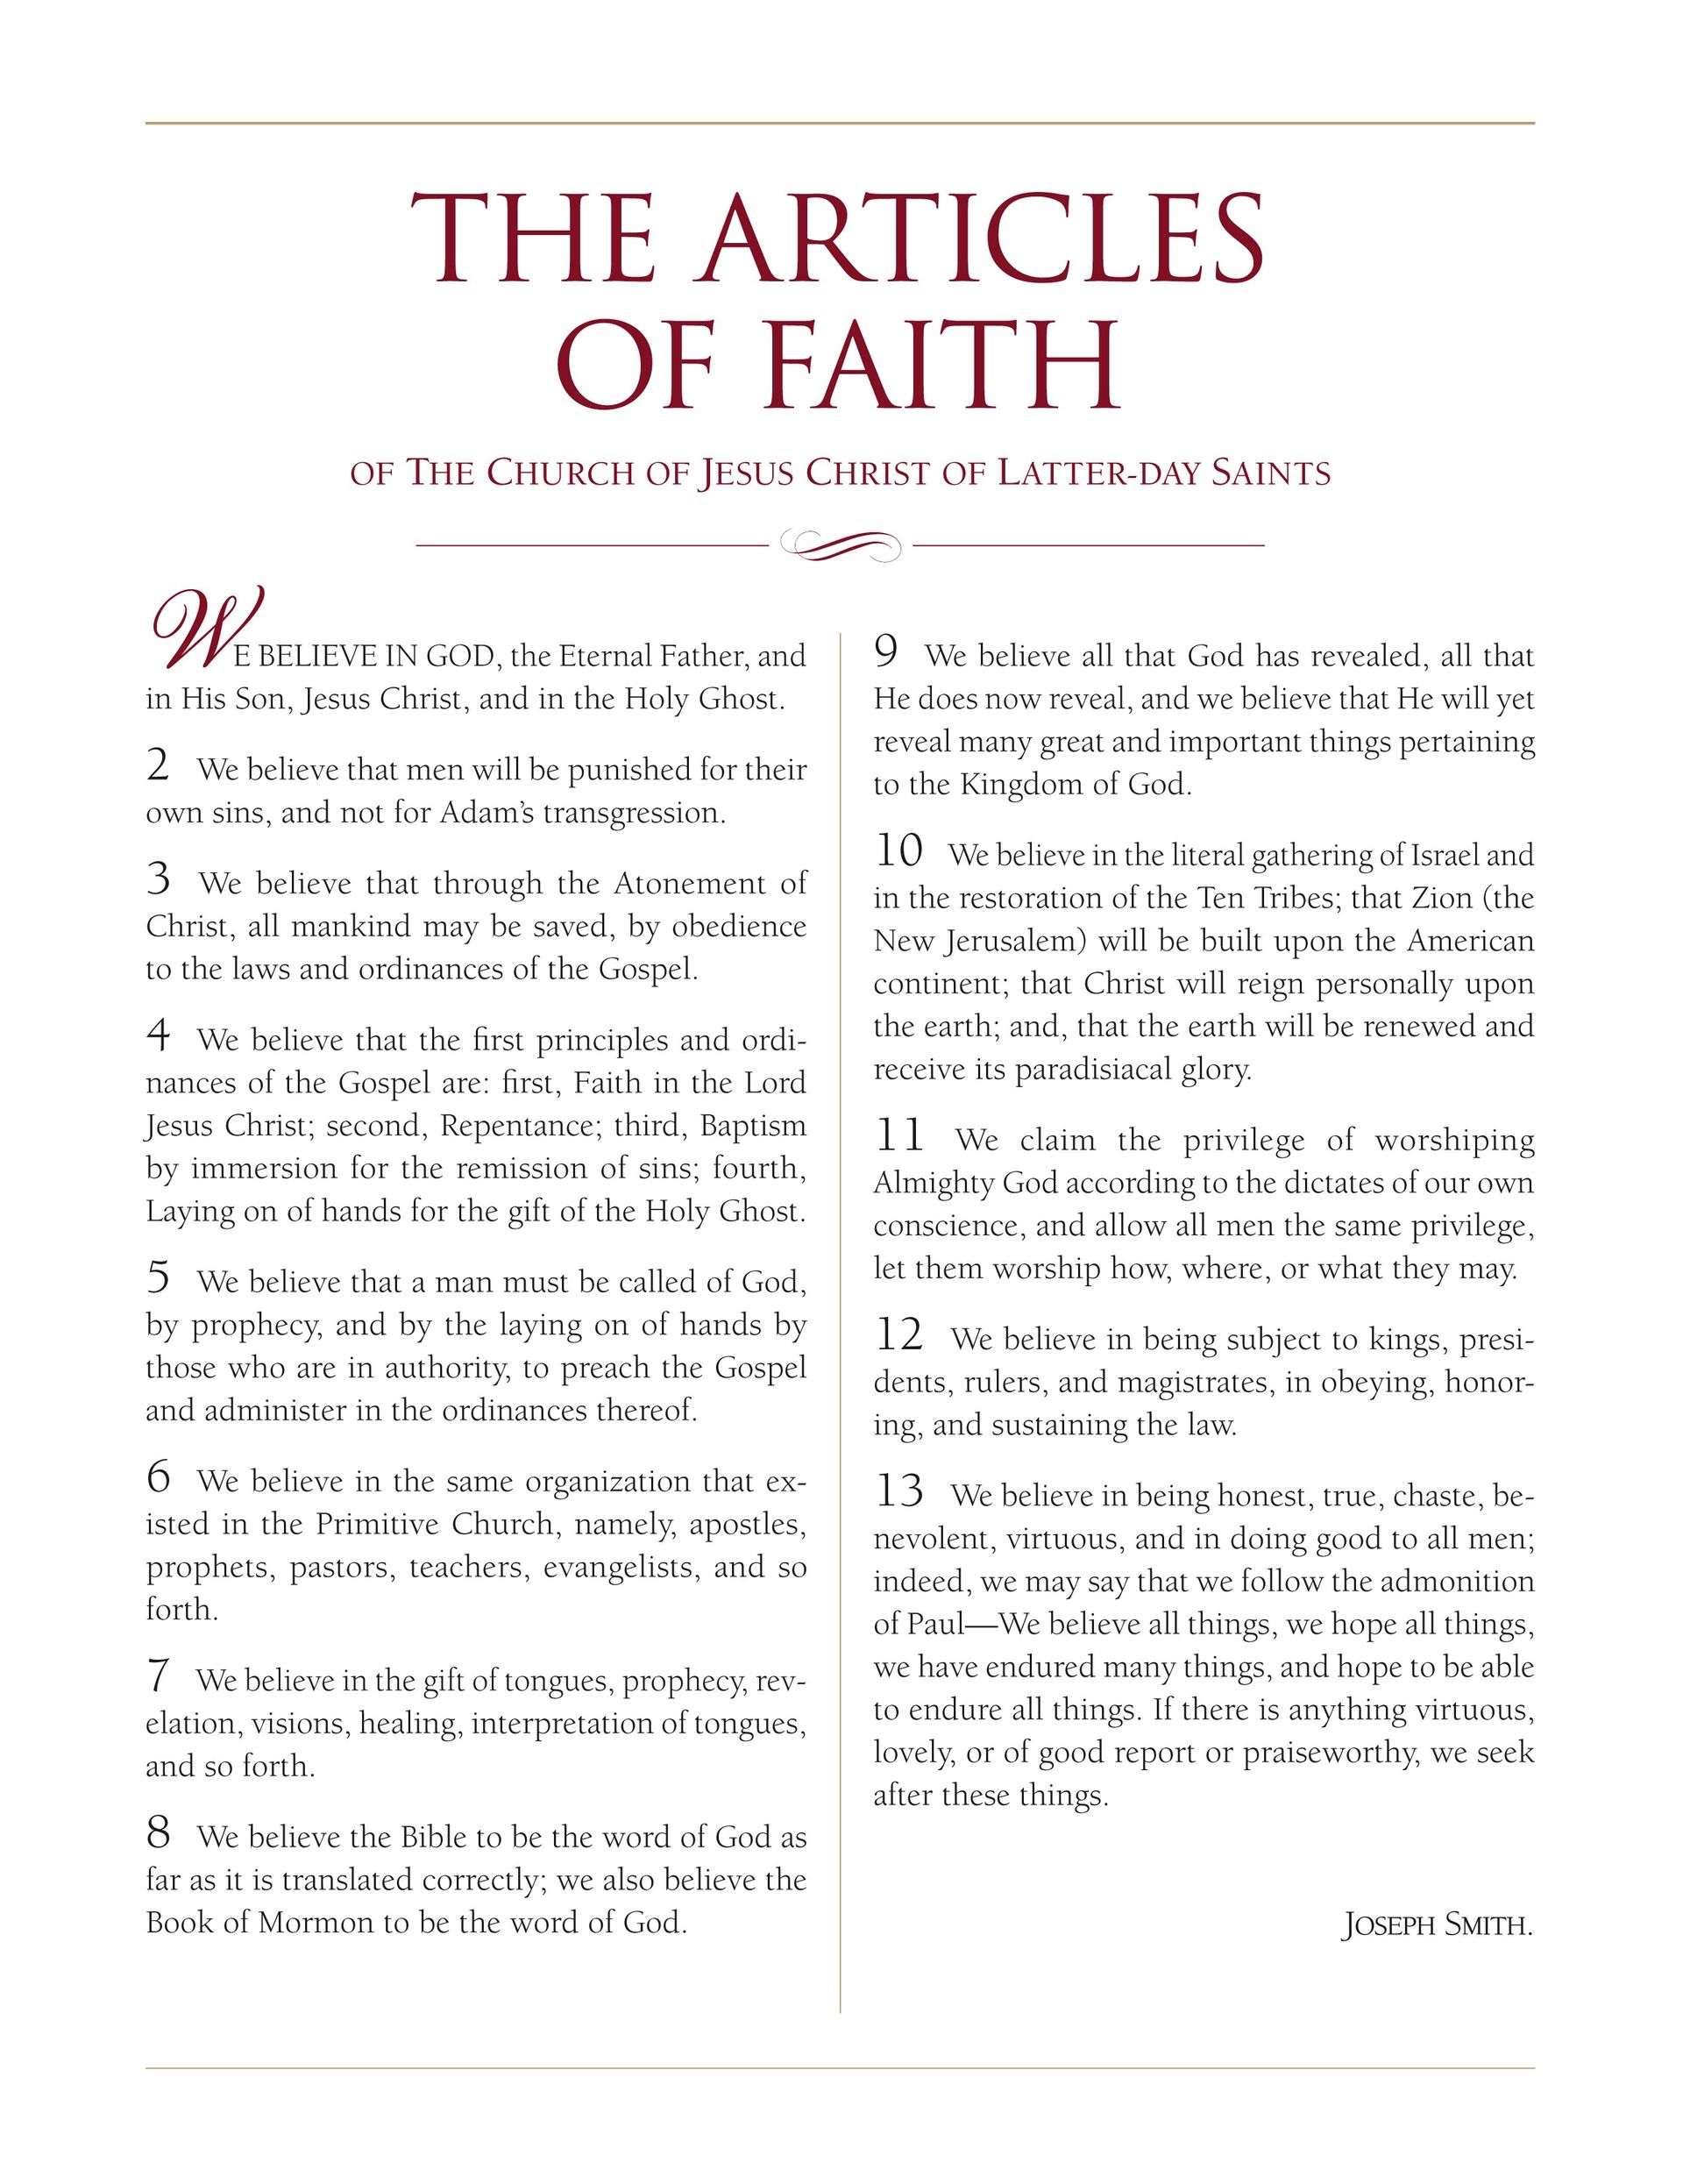 The official poster of “The Articles of Faith of The Church of Jesus Christ of Latter-day Saints.” © undefined ipCode 1.